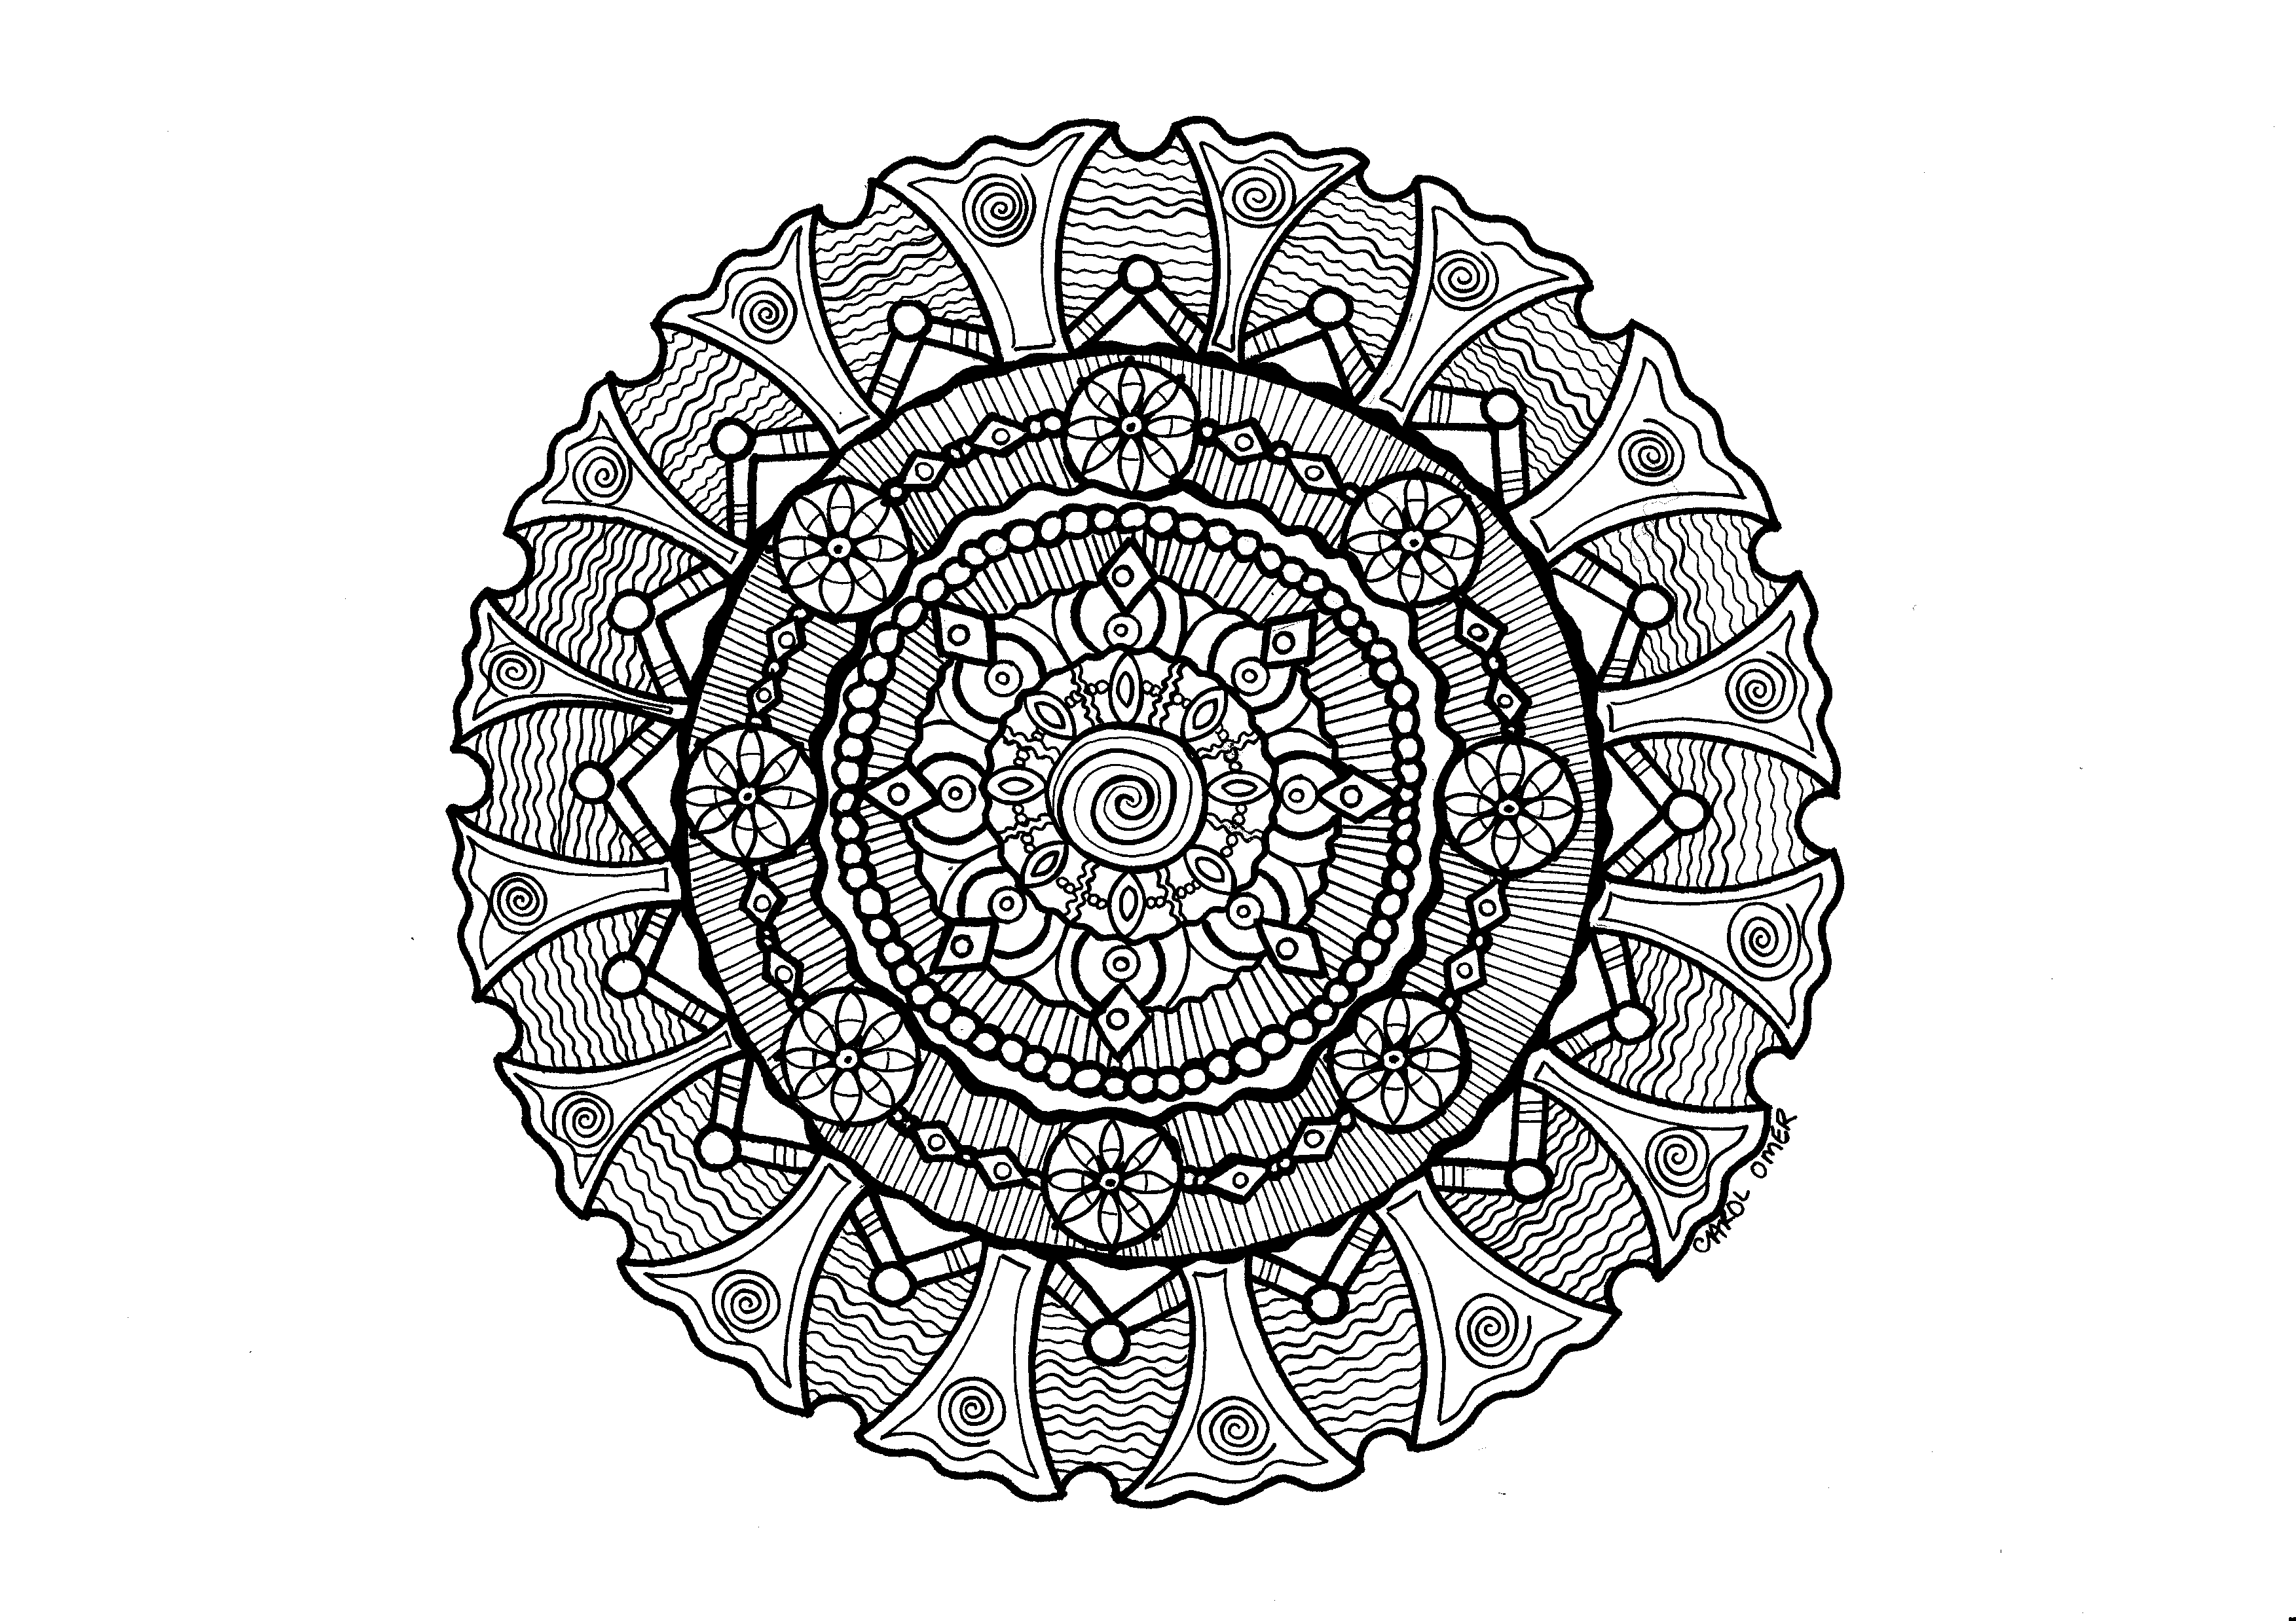 Healing With Art Ornamental Mandala Coloring Book For Teens - By